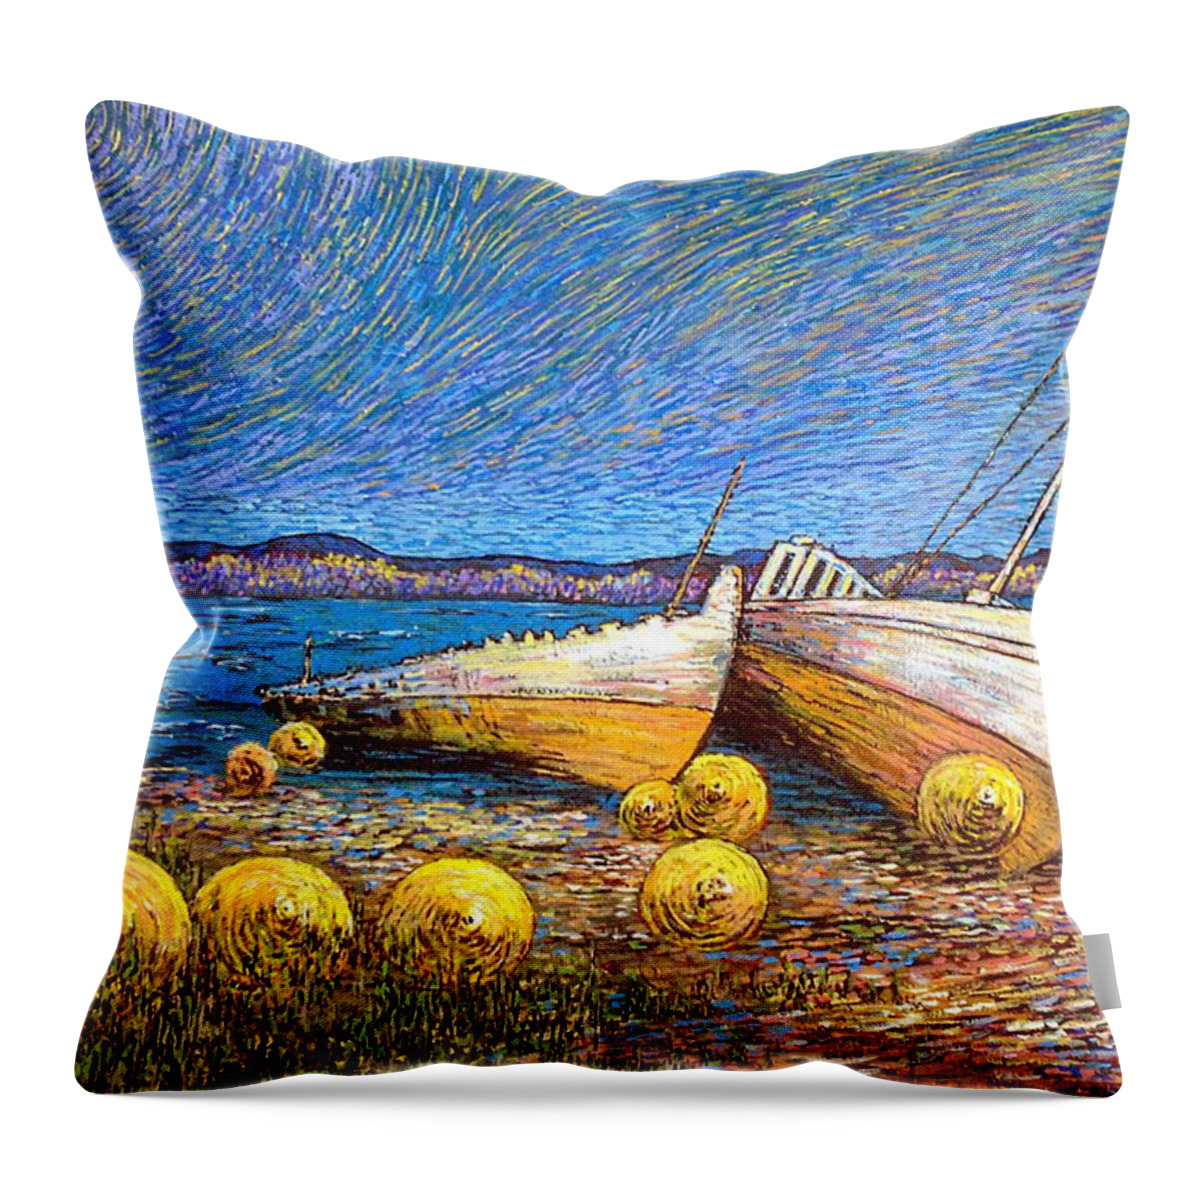 Stranded Throw Pillow featuring the painting Stranded - Bar Road by Michael Graham